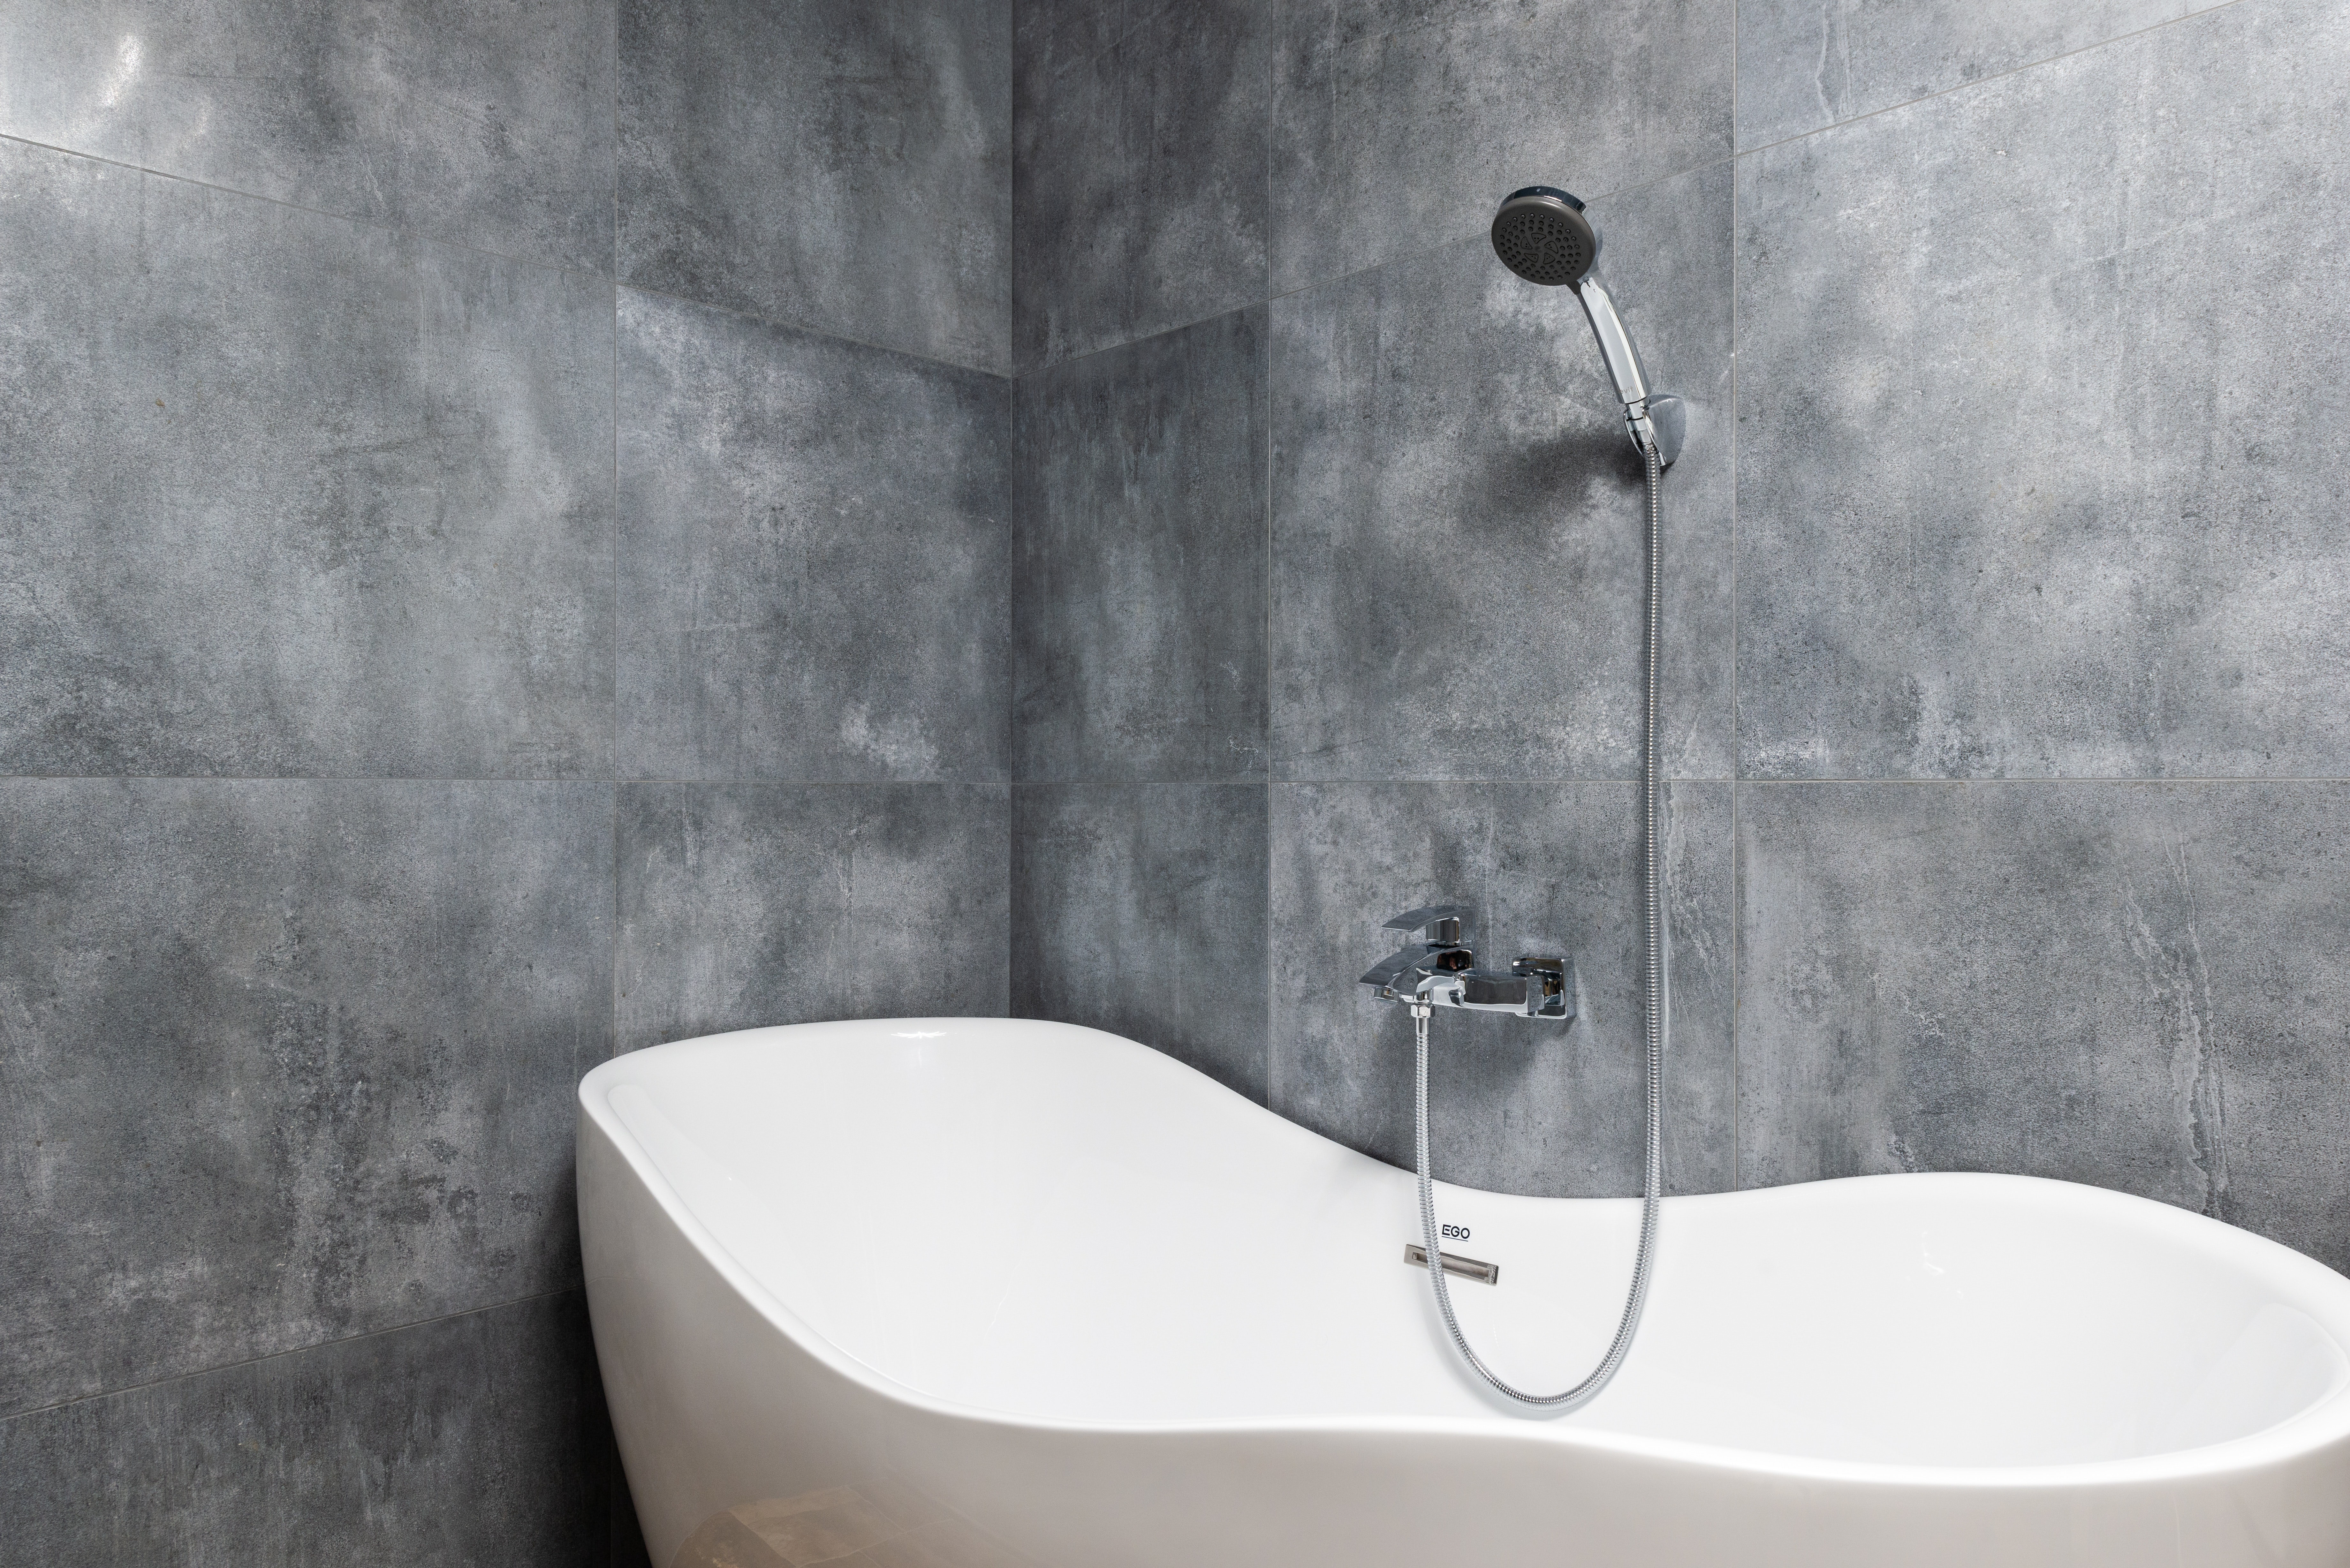 Curvy back to wall freestanding bathtub with shower